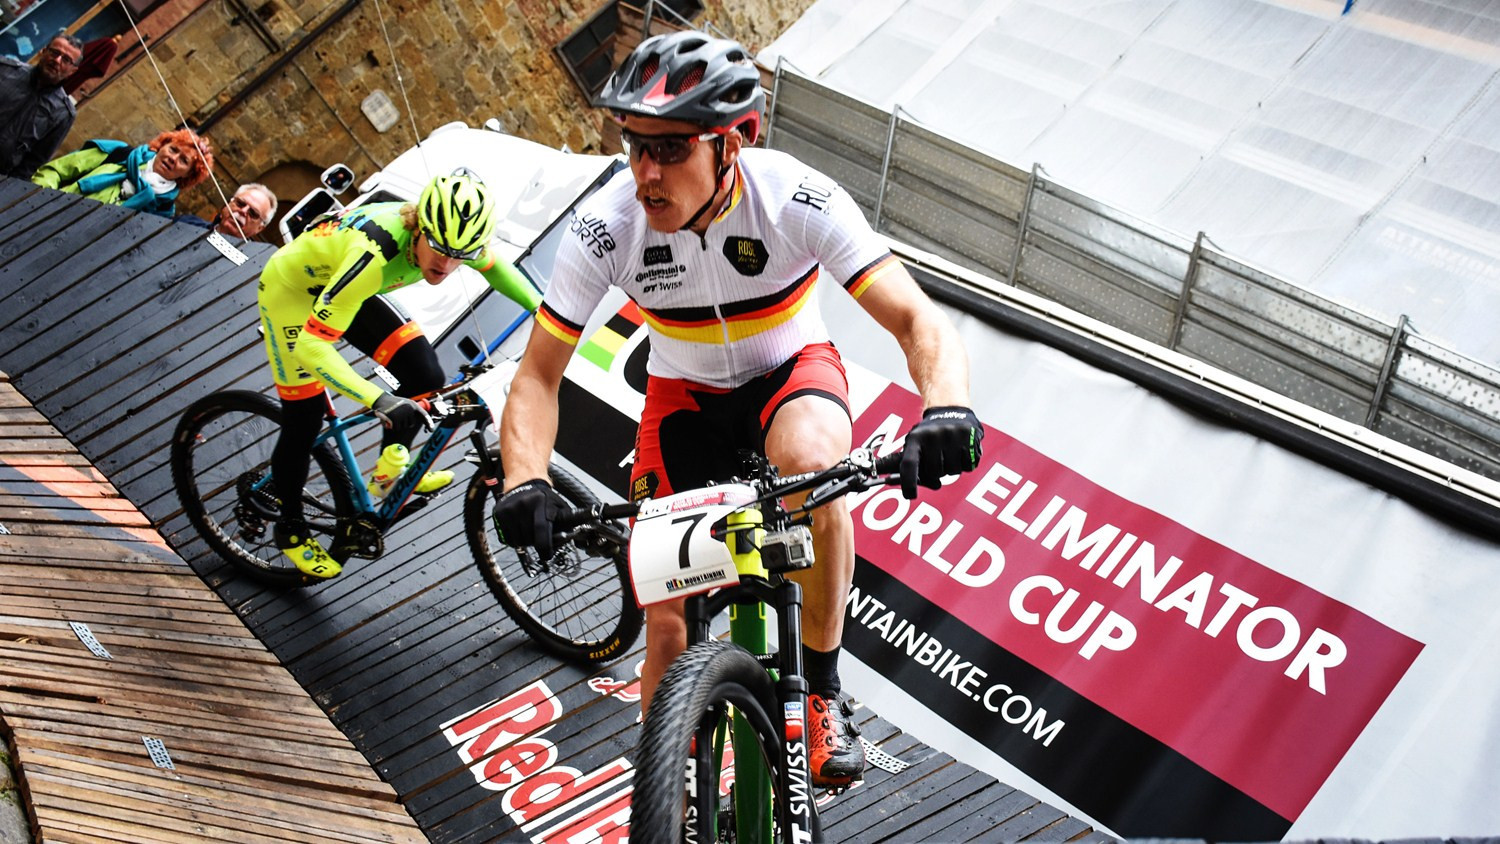 The cross-country format joins mountain eliminator on the programme for the Urban Cycling World Championships ©City Mountainbike